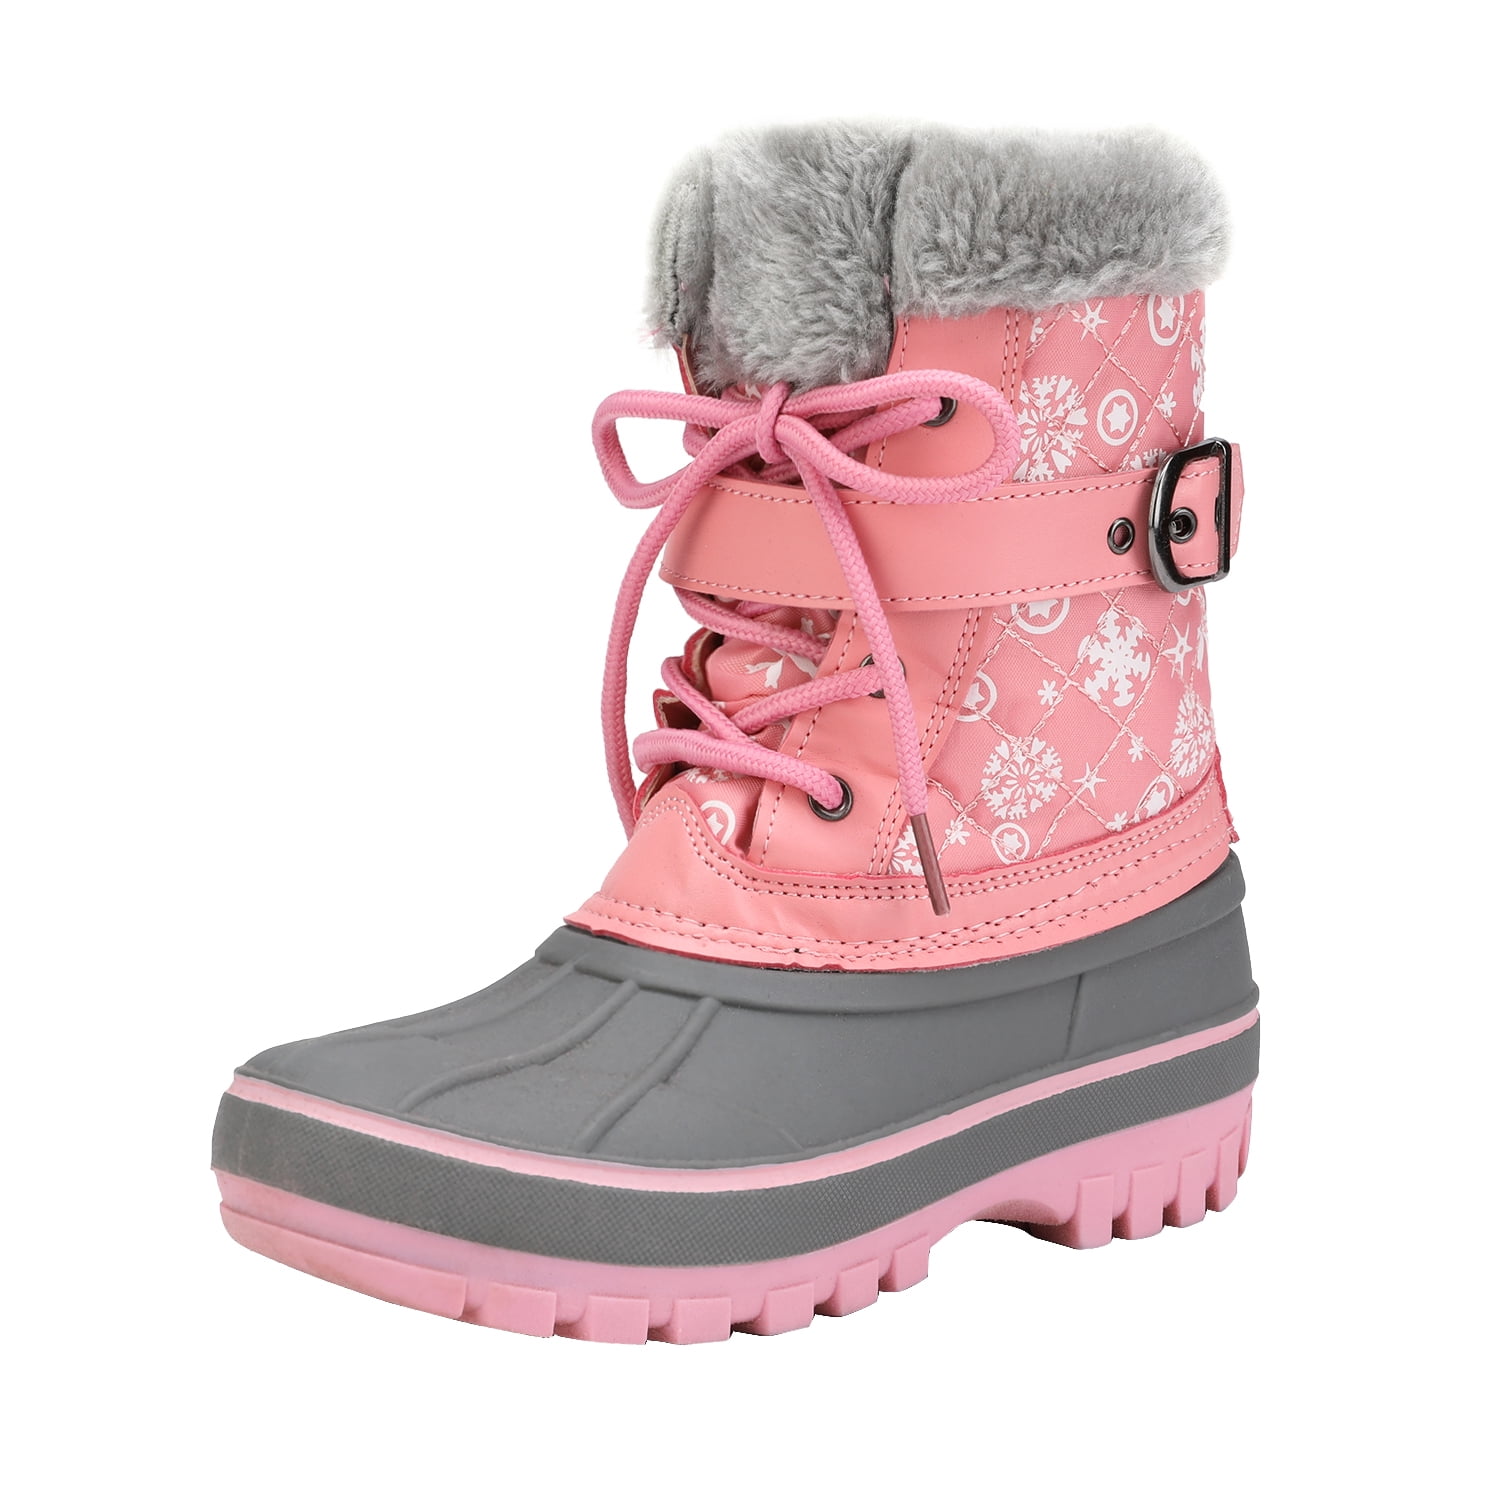 GIRLS FUR-LINED ANKLE CALF PINK WARM WINTER BOOTS SHOES JUNIOR INFANT SIZES 7-13 